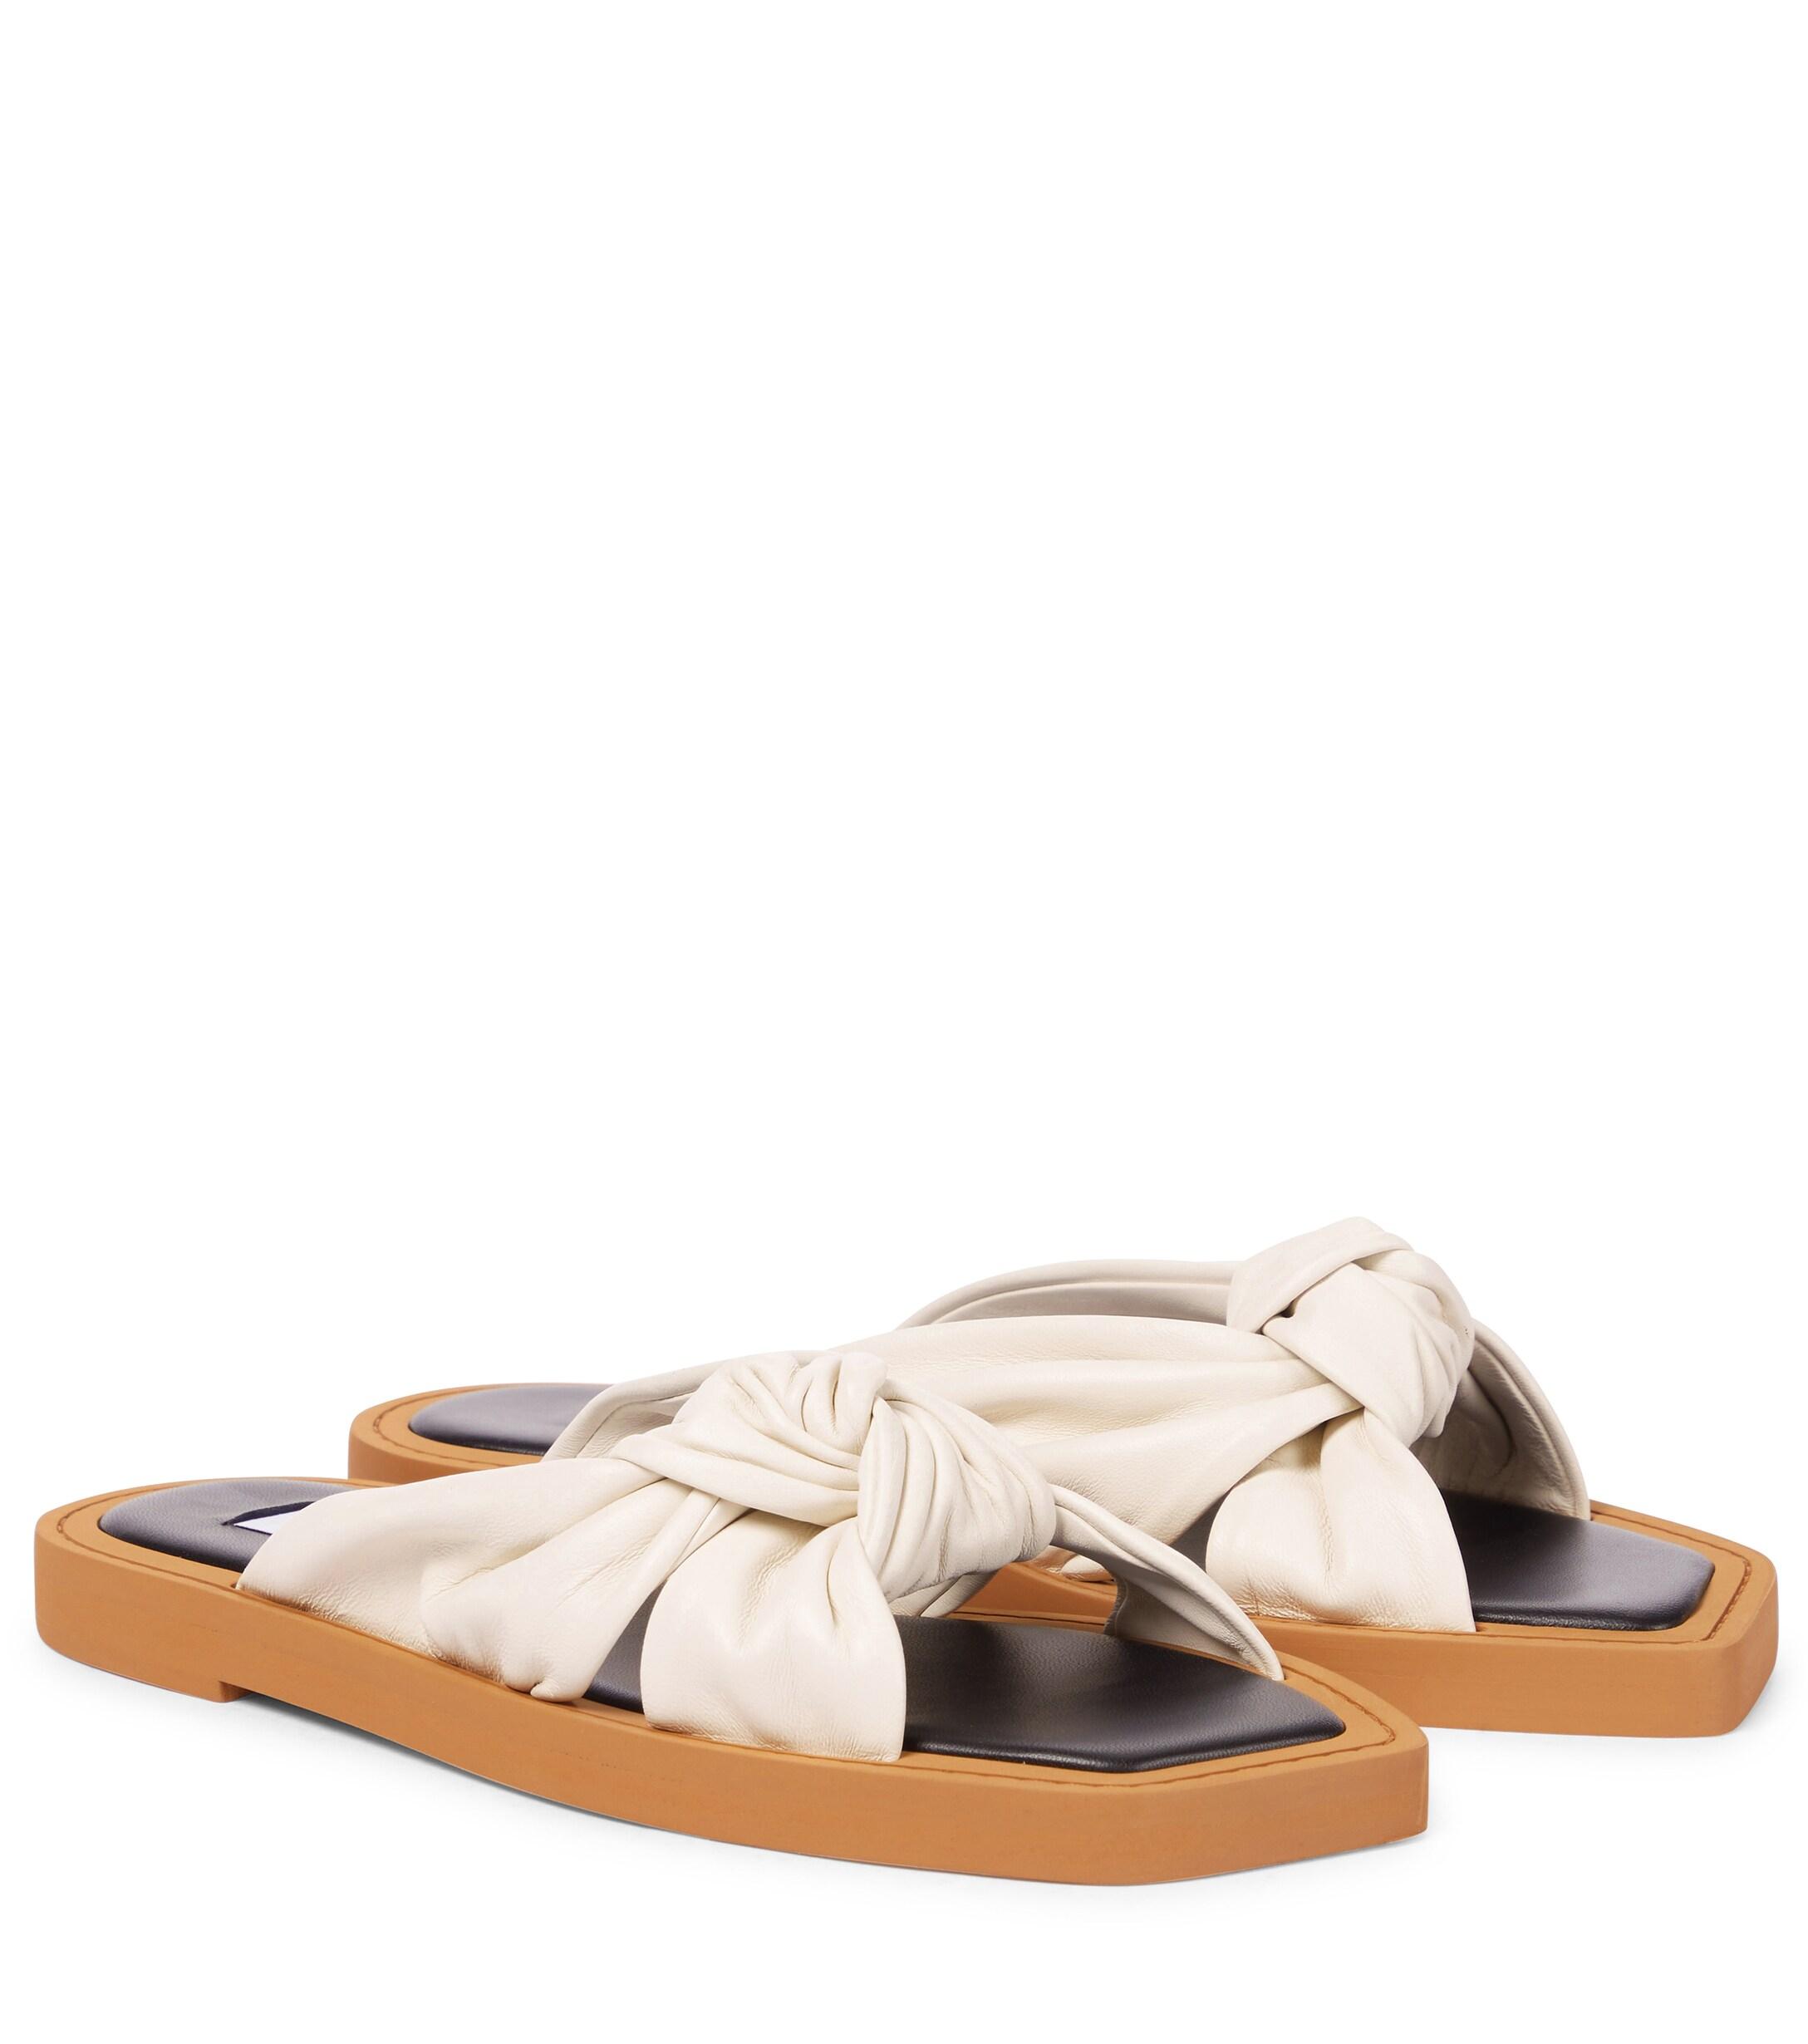 Tropica Leather Sandals